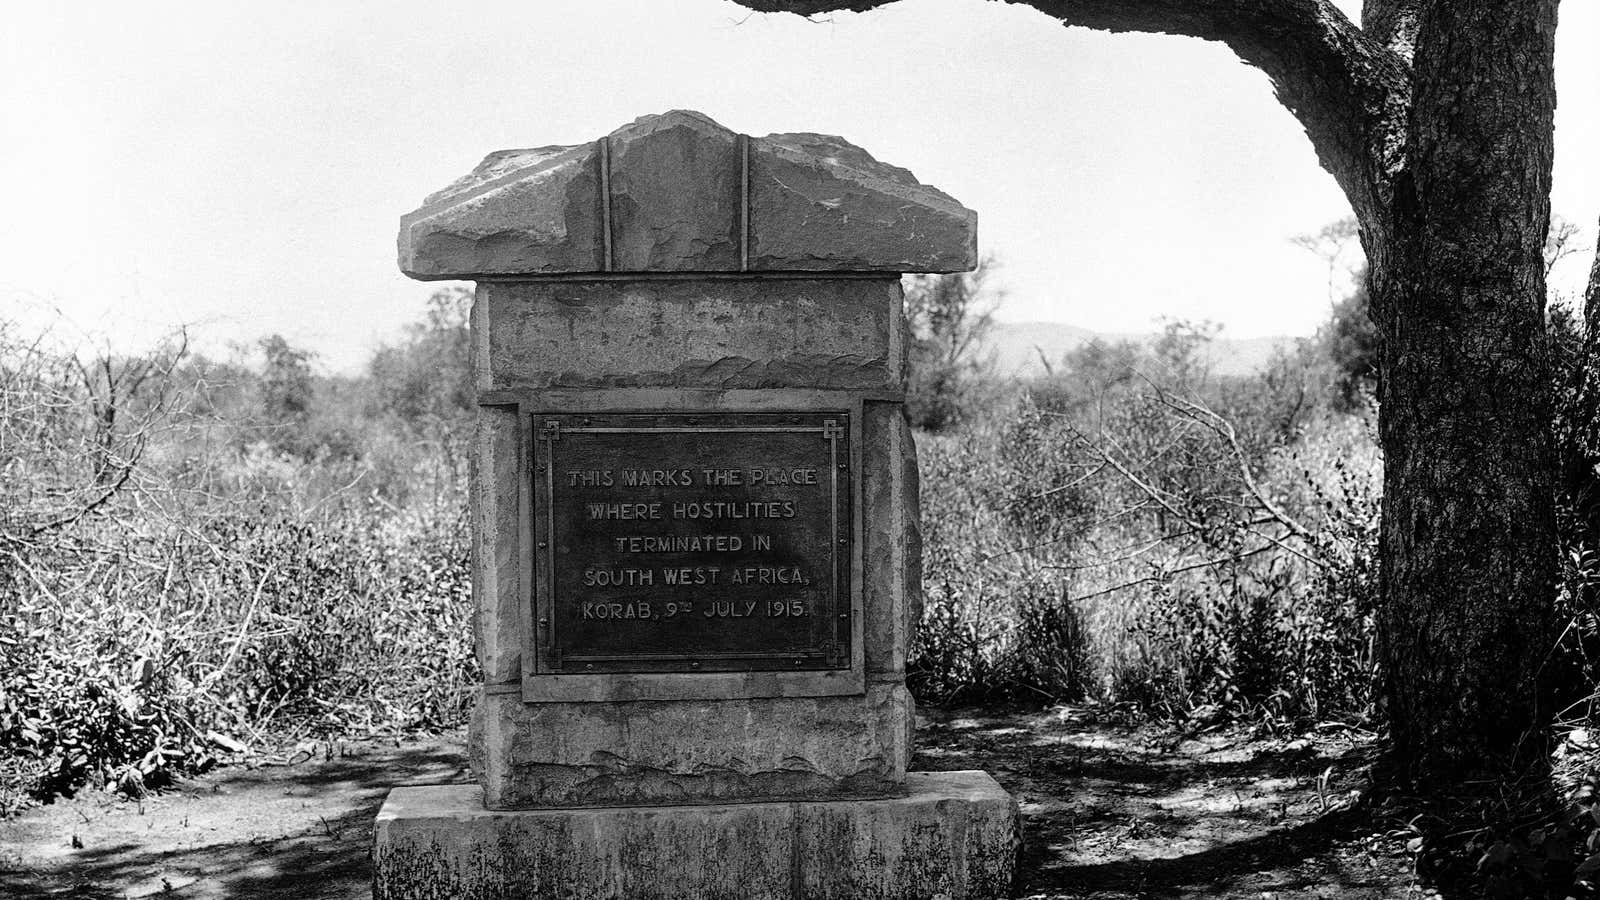 A commemoration stone at Korab, South West Africa, that marks the place where hostilities ceased in World War One between the British and German forces.